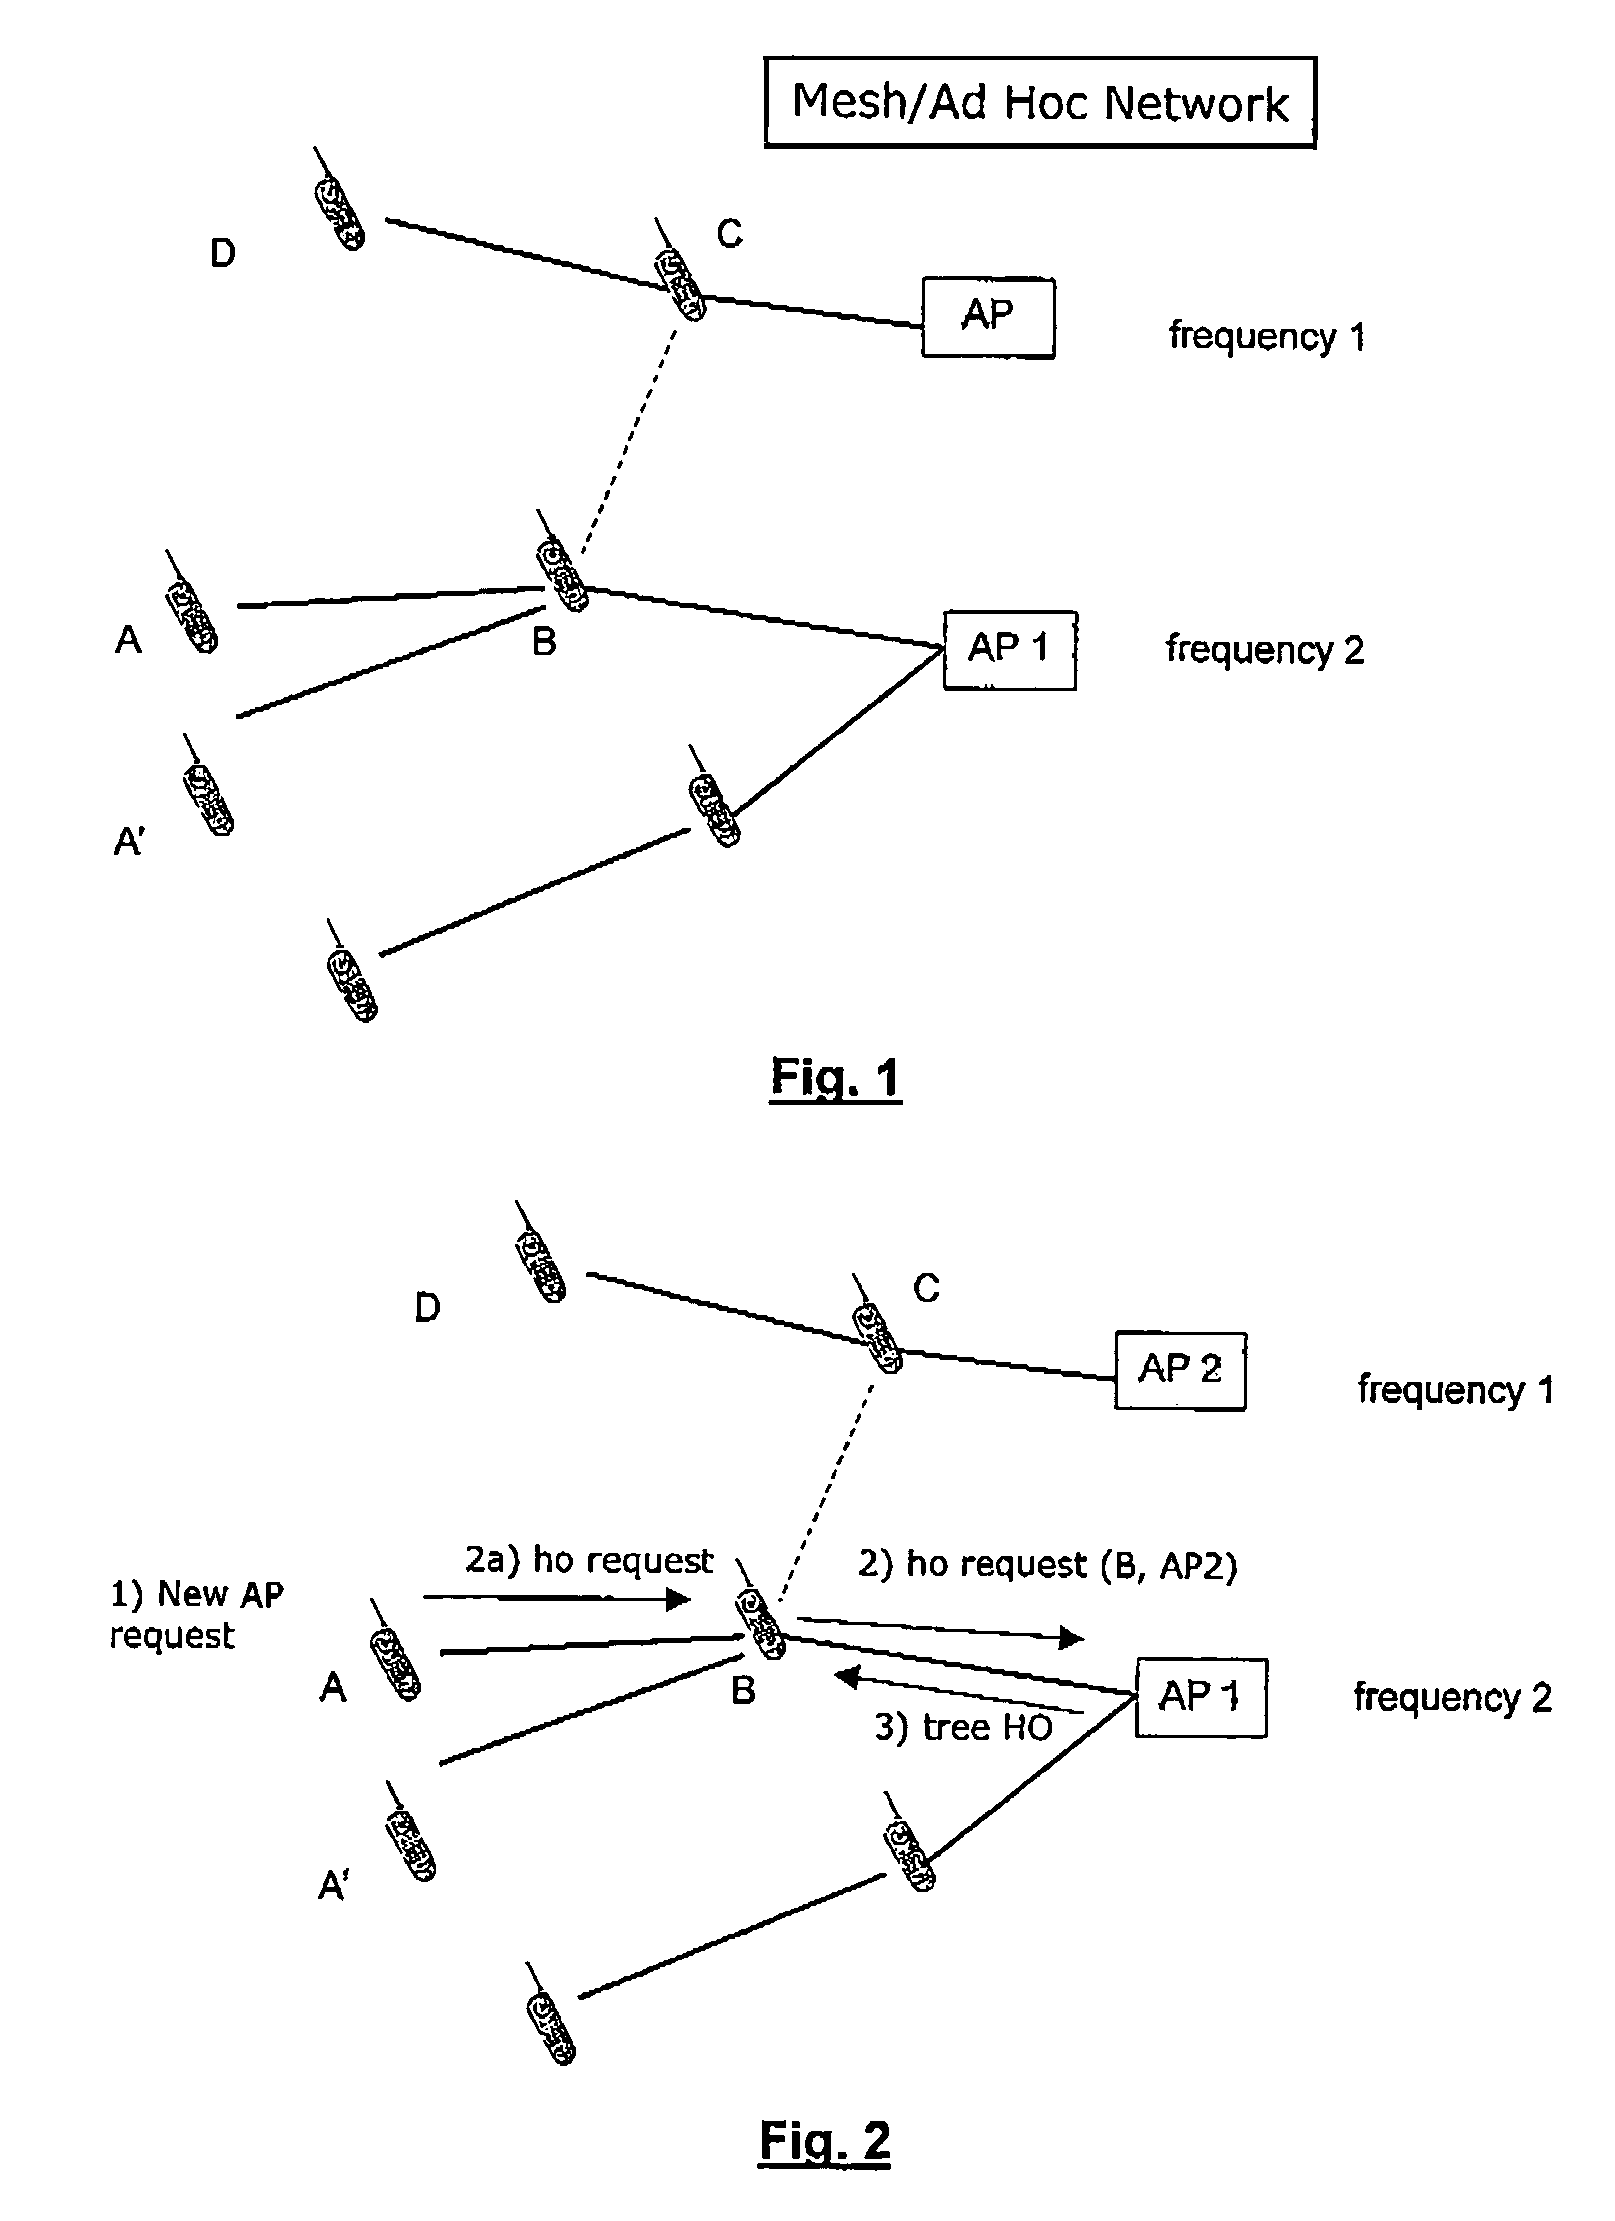 Apparatus and method for improved handover in mesh networks